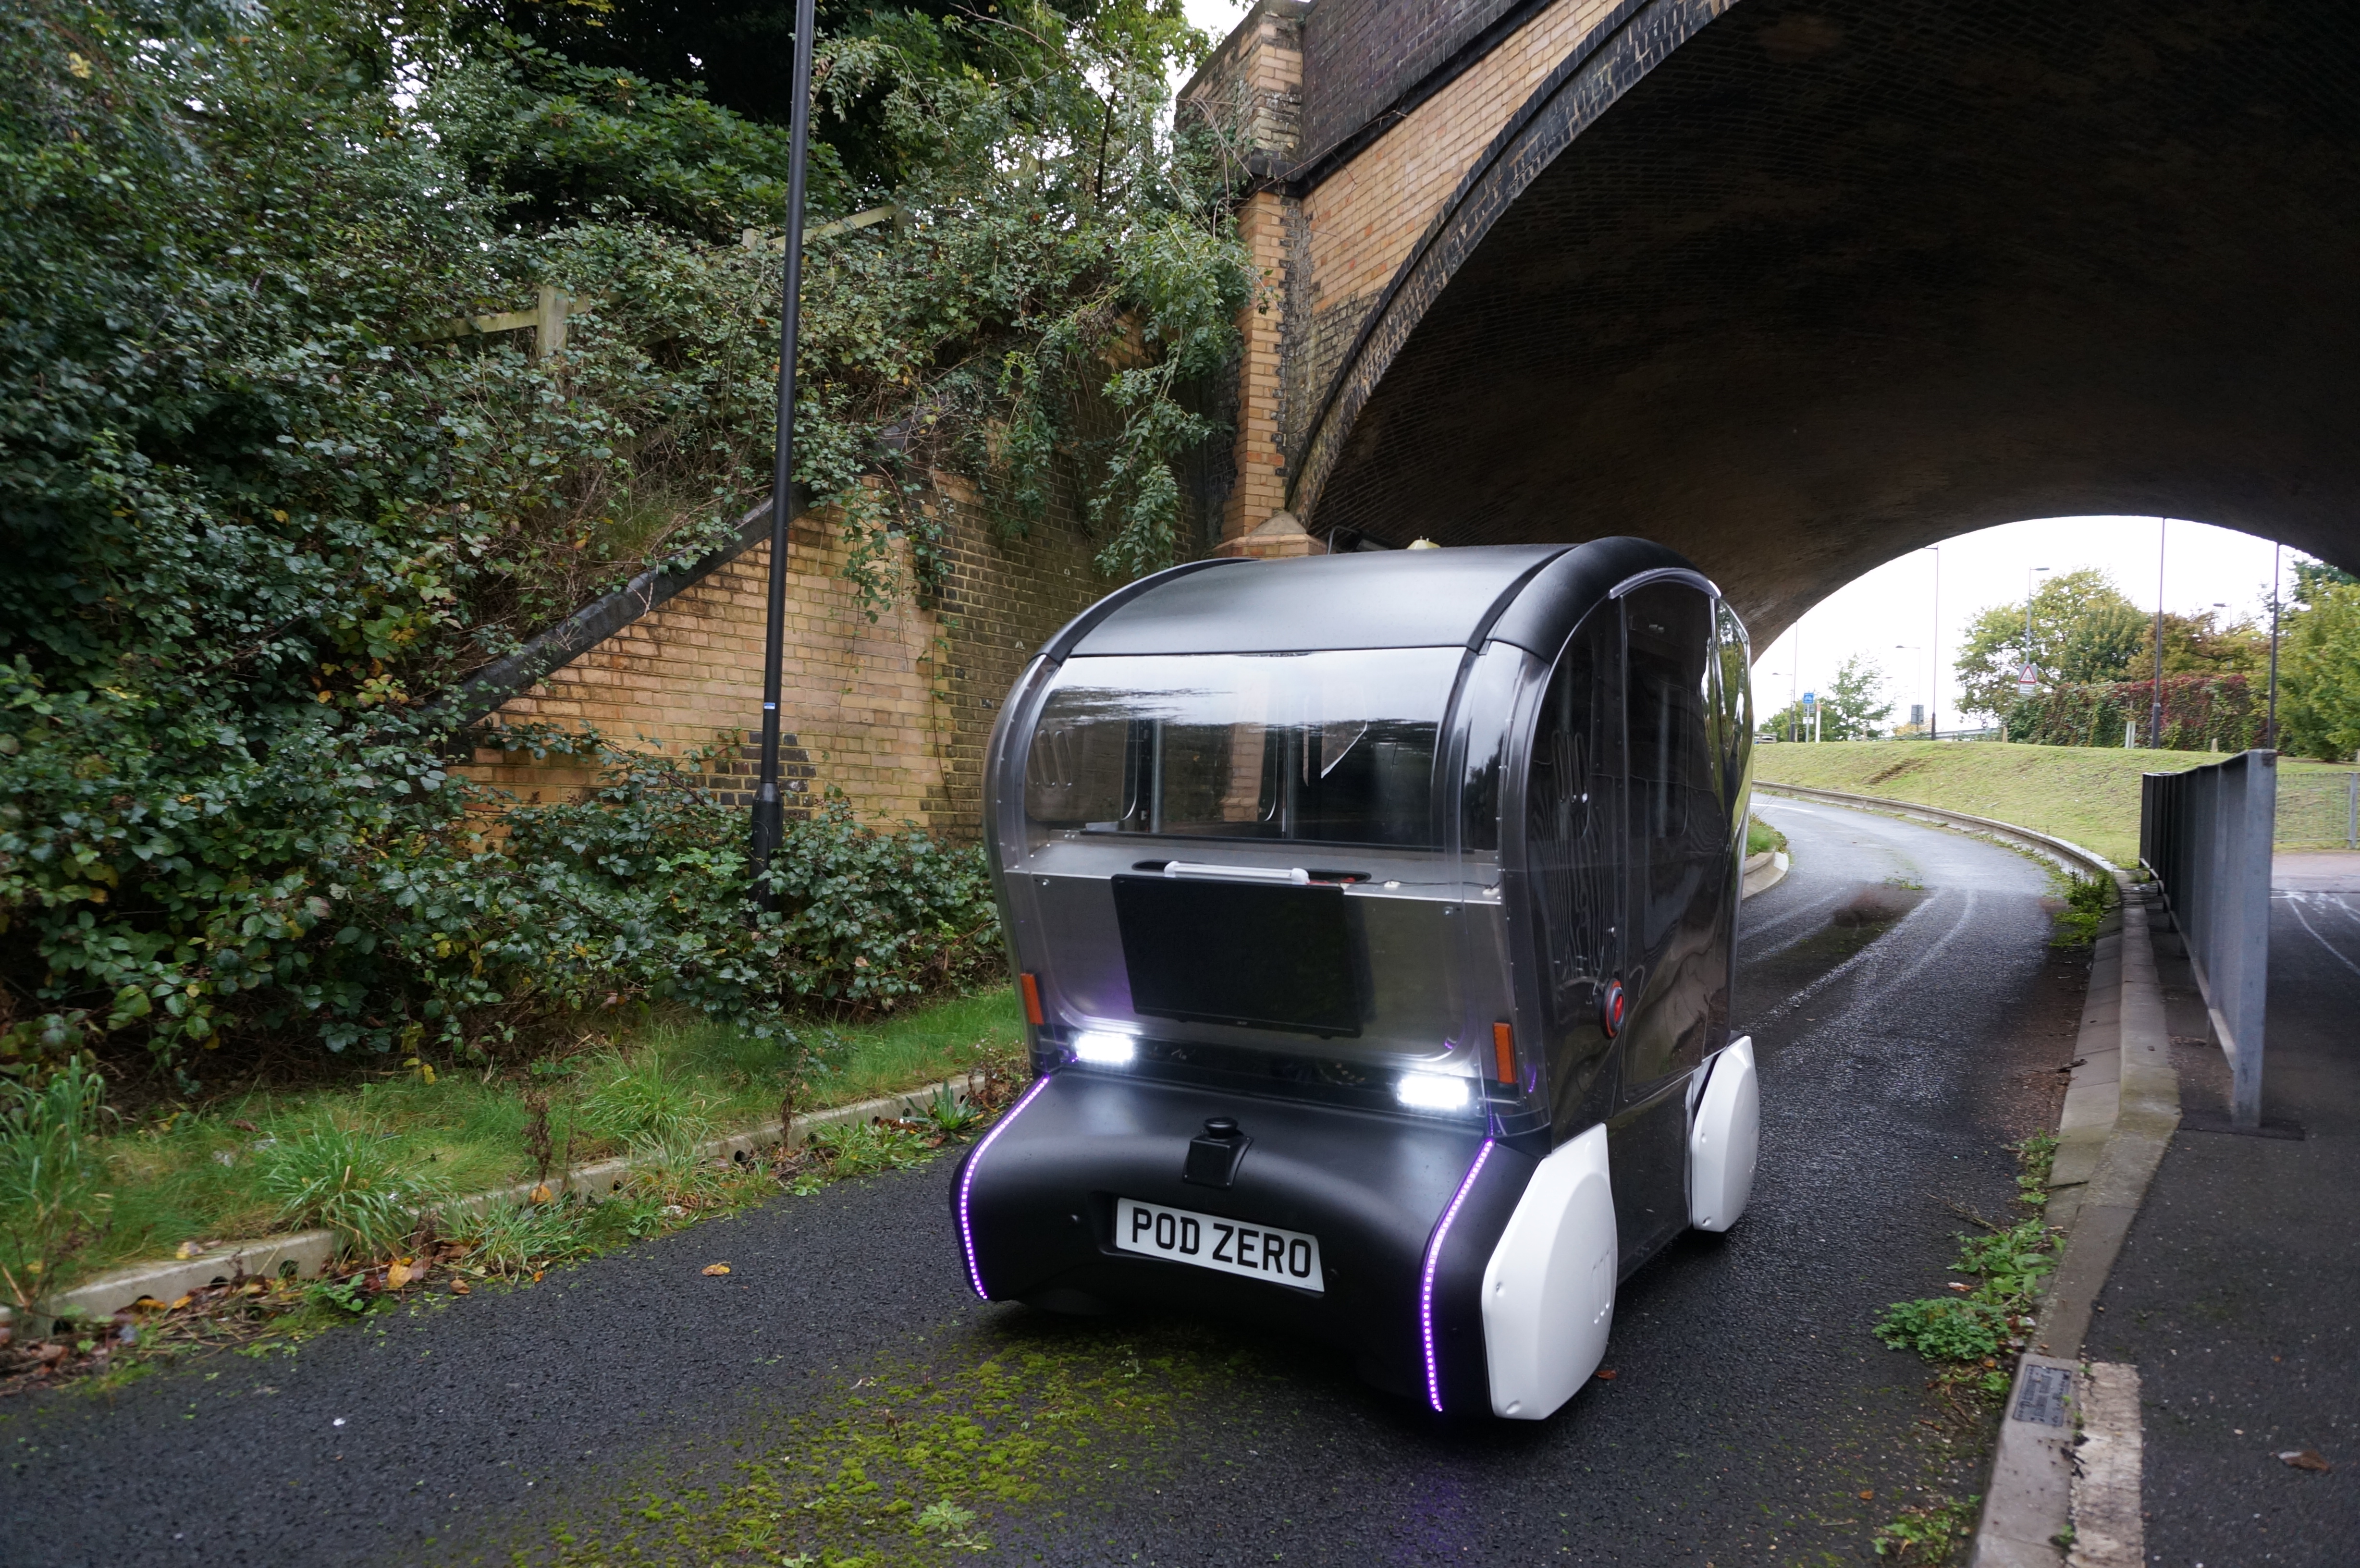 Cambridge wins £3.2million to develop one of the first autonomous shuttle services in the UK